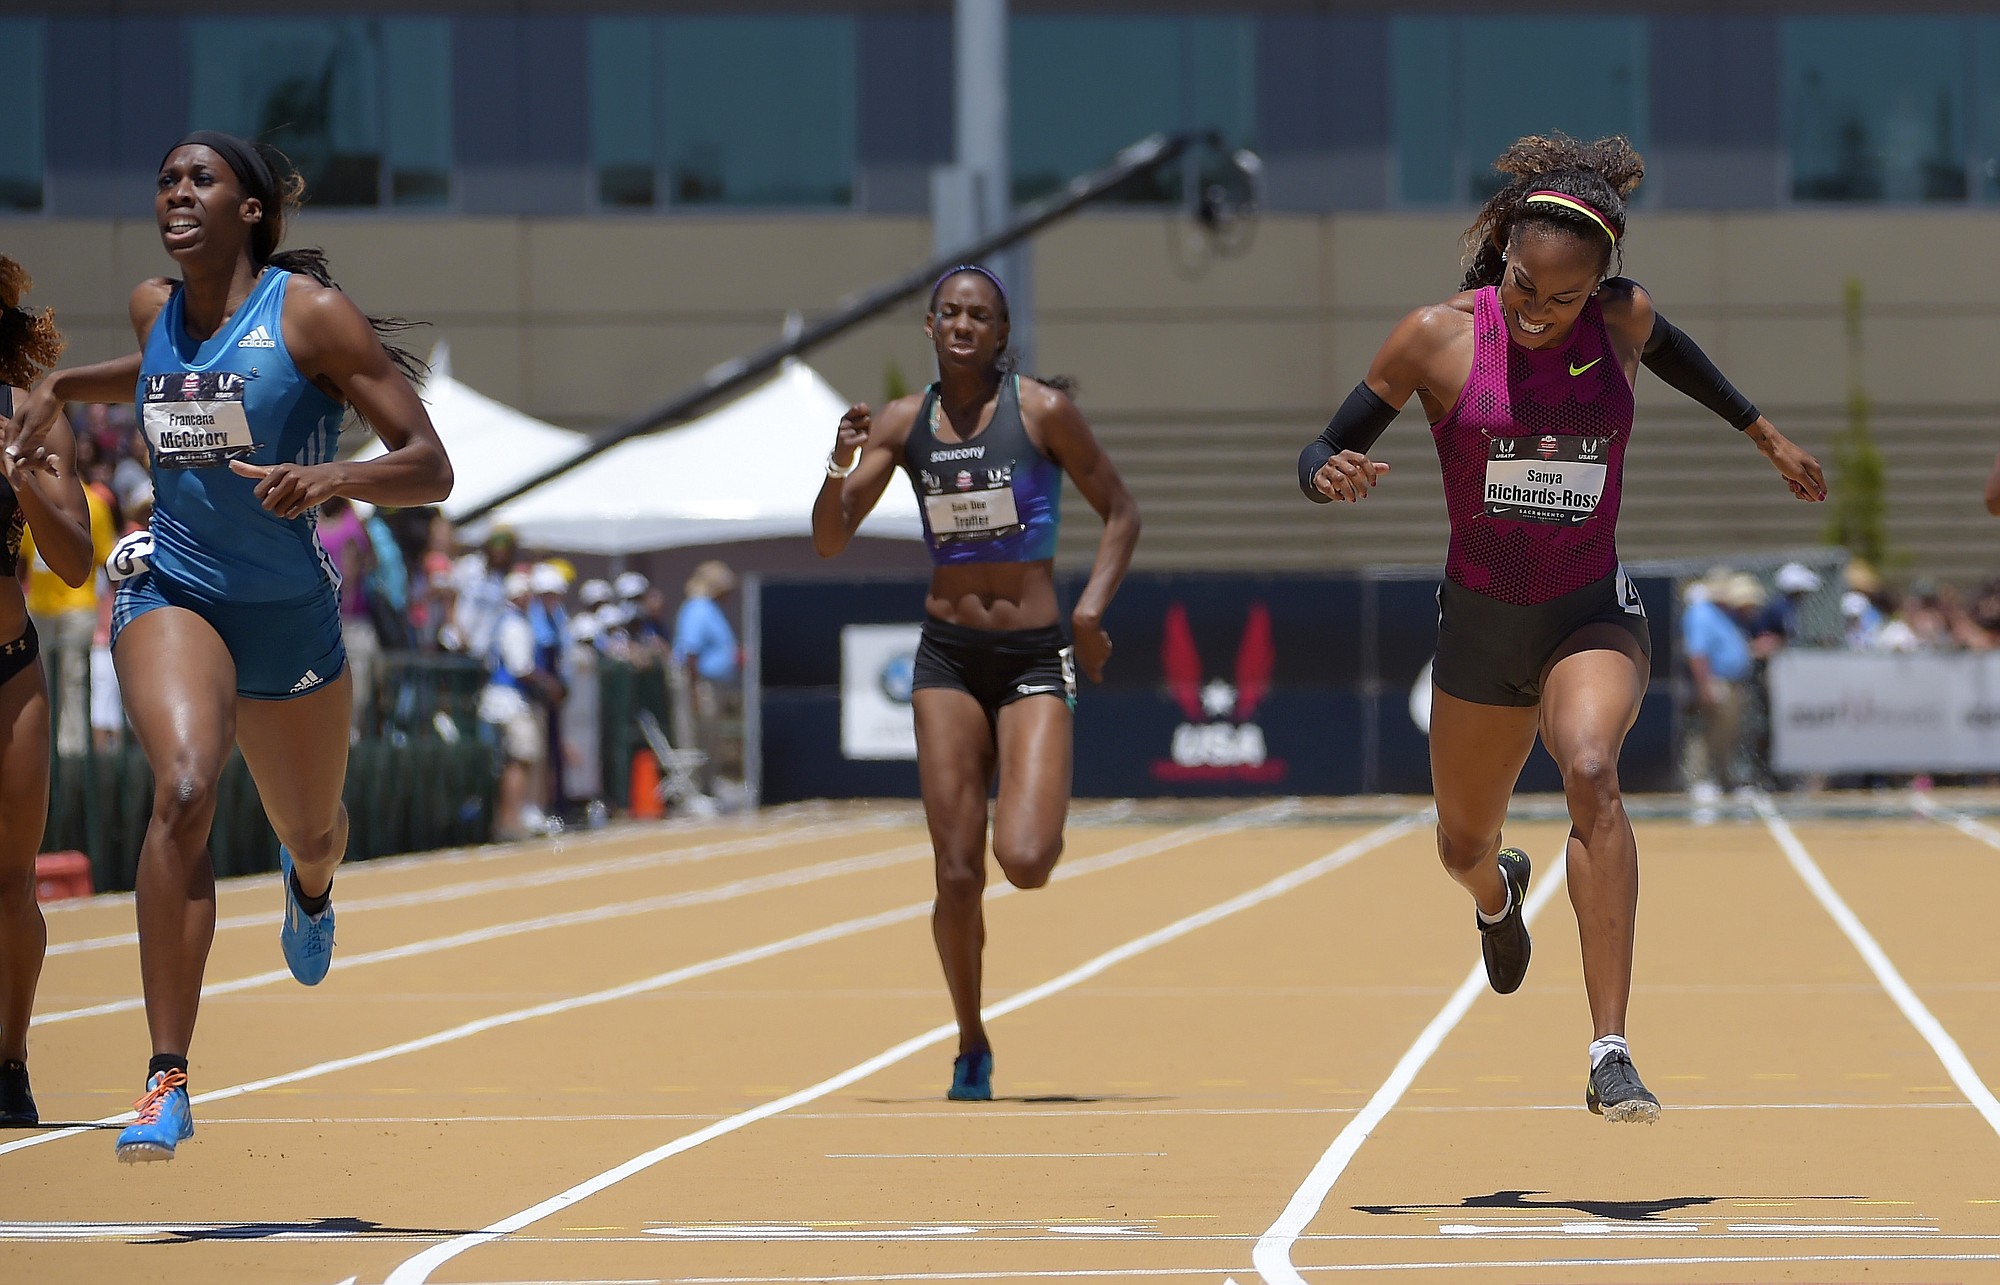 Francena McCorory, left, wins the women's 400 meters ahead of Sanya Richards-Ross, right, and Dee Dee Trotter at the U.S. outdoor track and field championships, Saturday, June 28, 2014, in Sacramento, Calif. Richards-Ross took second in the event. (AP Photo/Mark J.